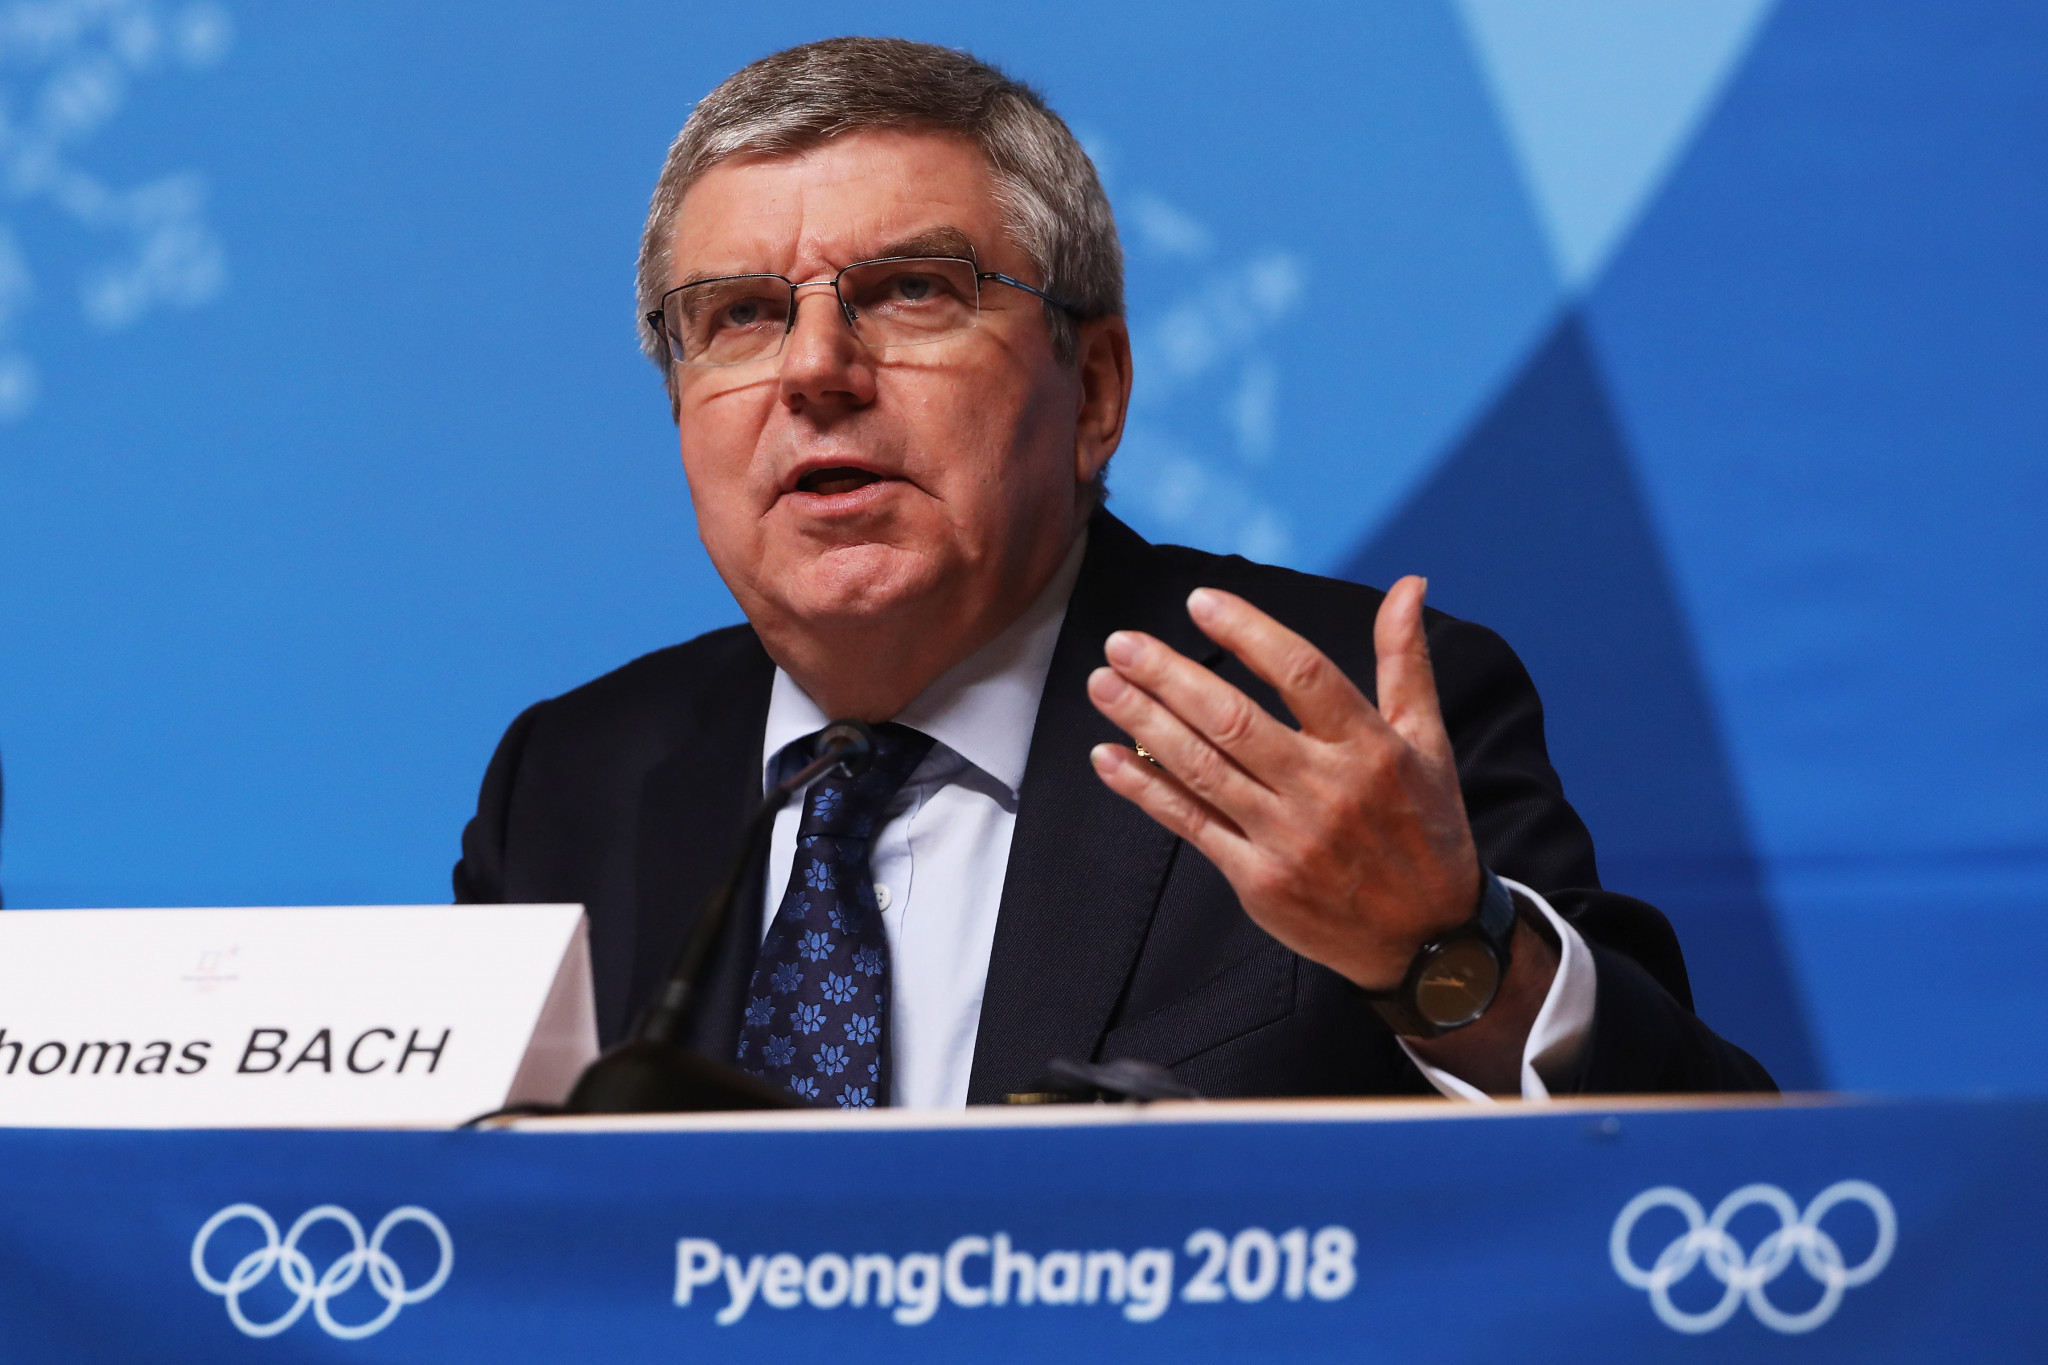 Russian doping questions dominated Thomas Bach's closing press conference at Pyeongchang 2018 ©Getty Images